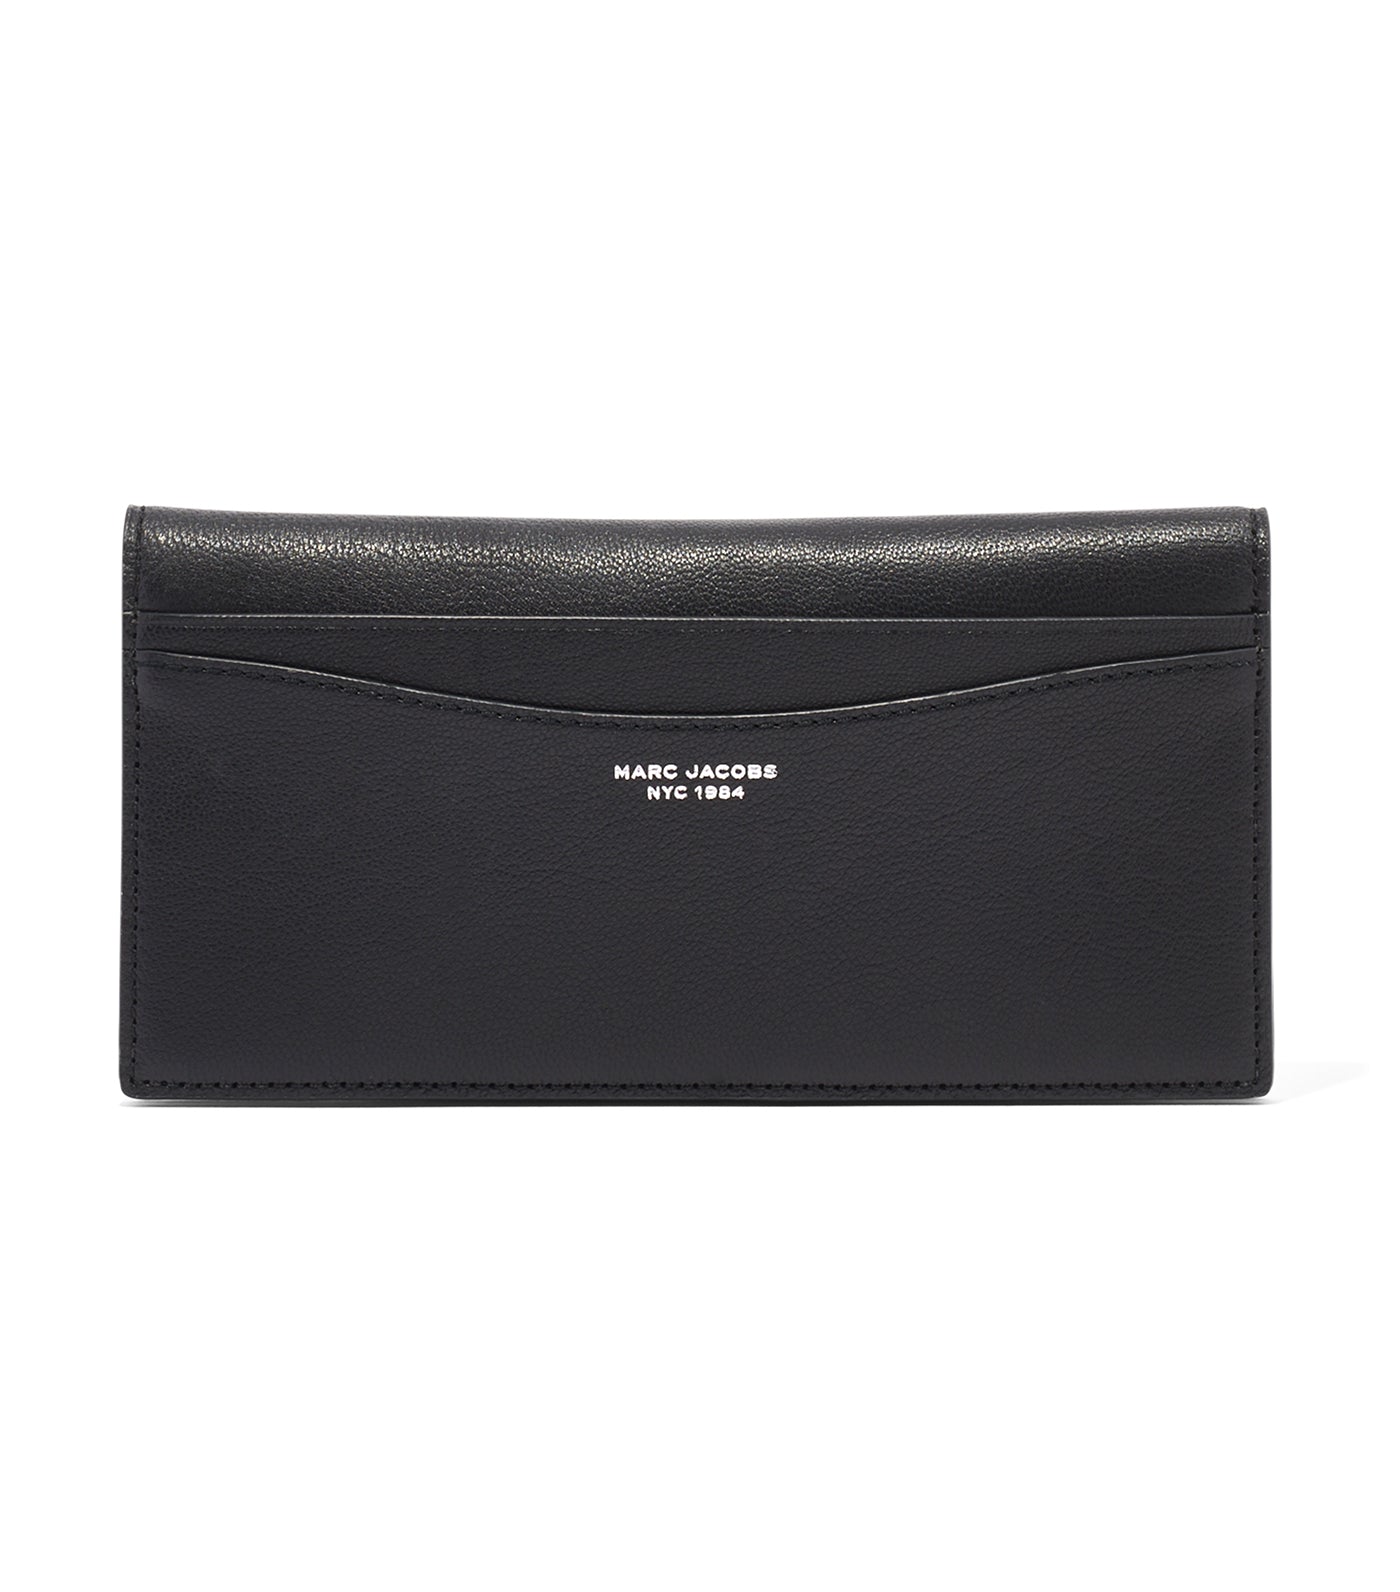 The Leather Bifold Wallet Black